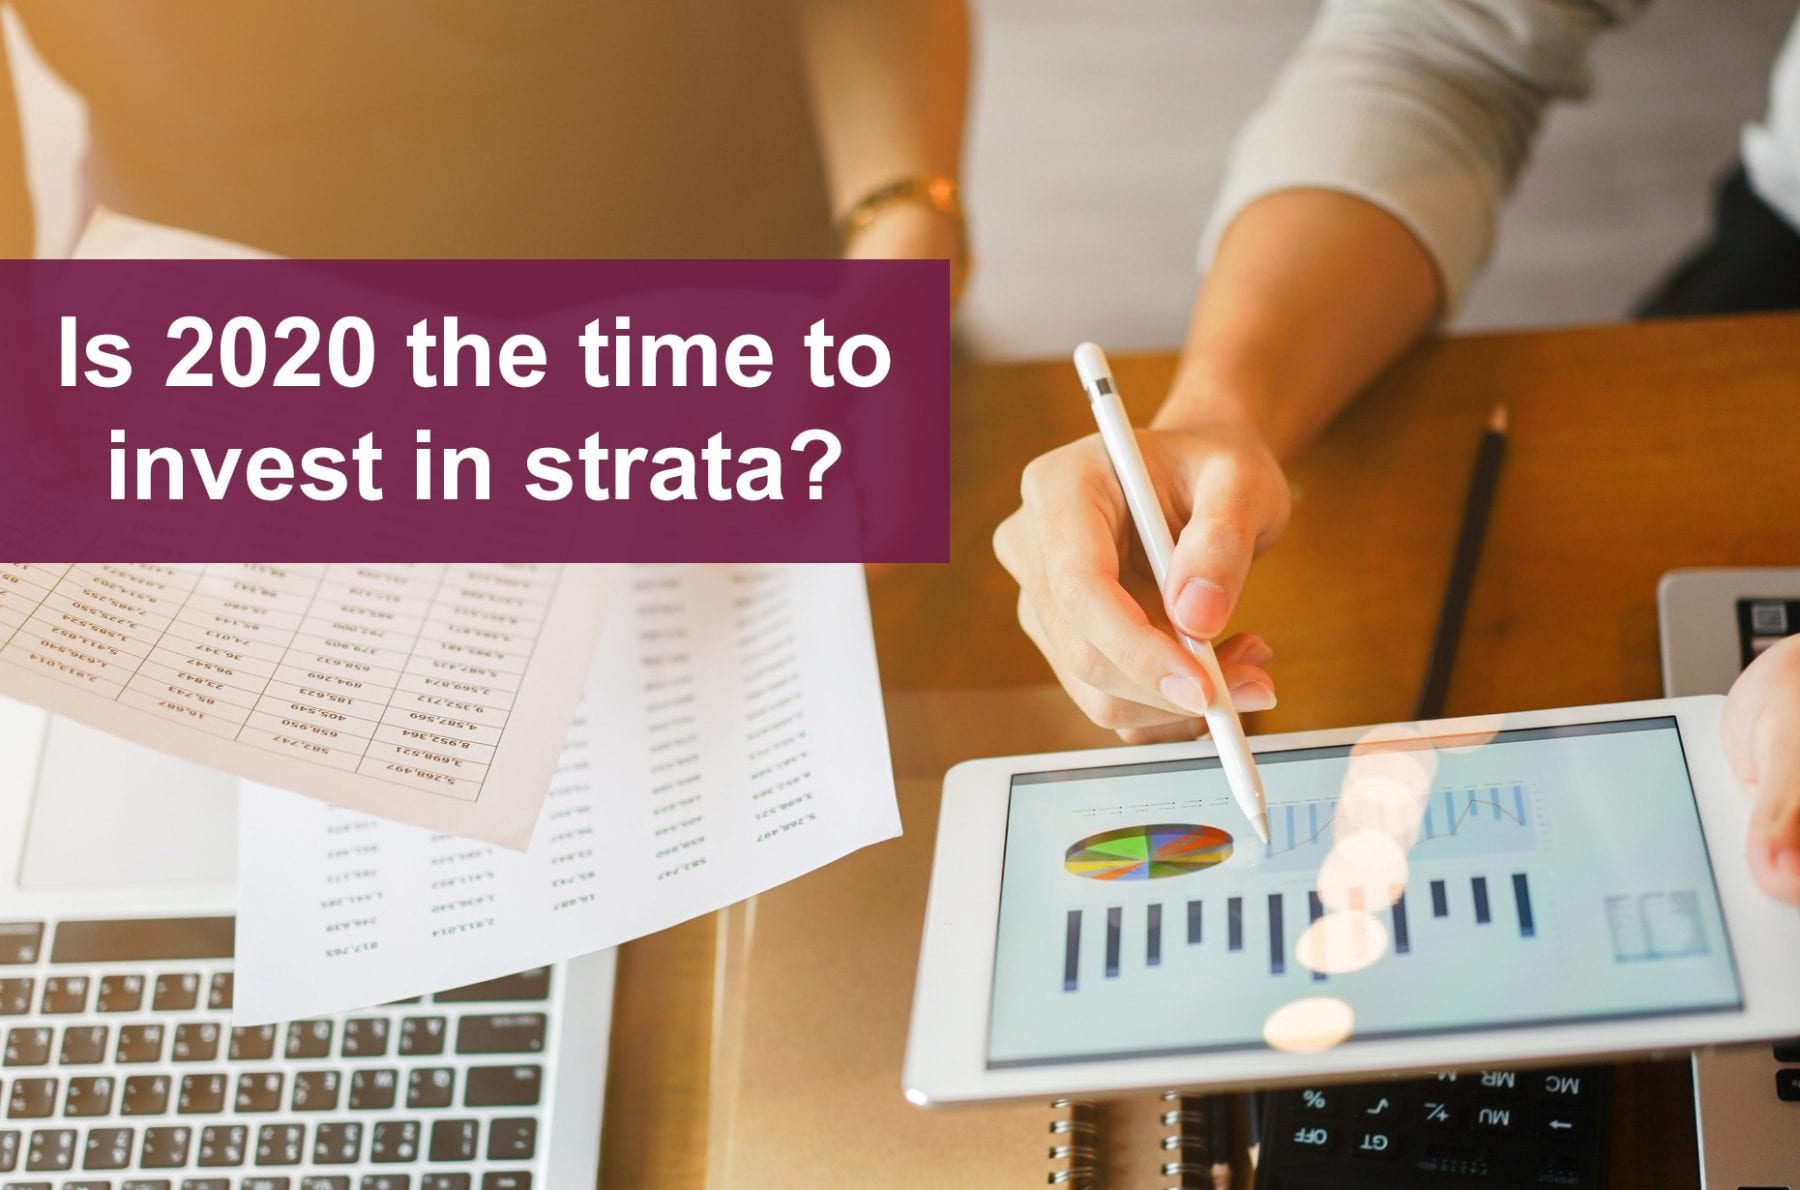 Is 2020 the time to invest in strata?